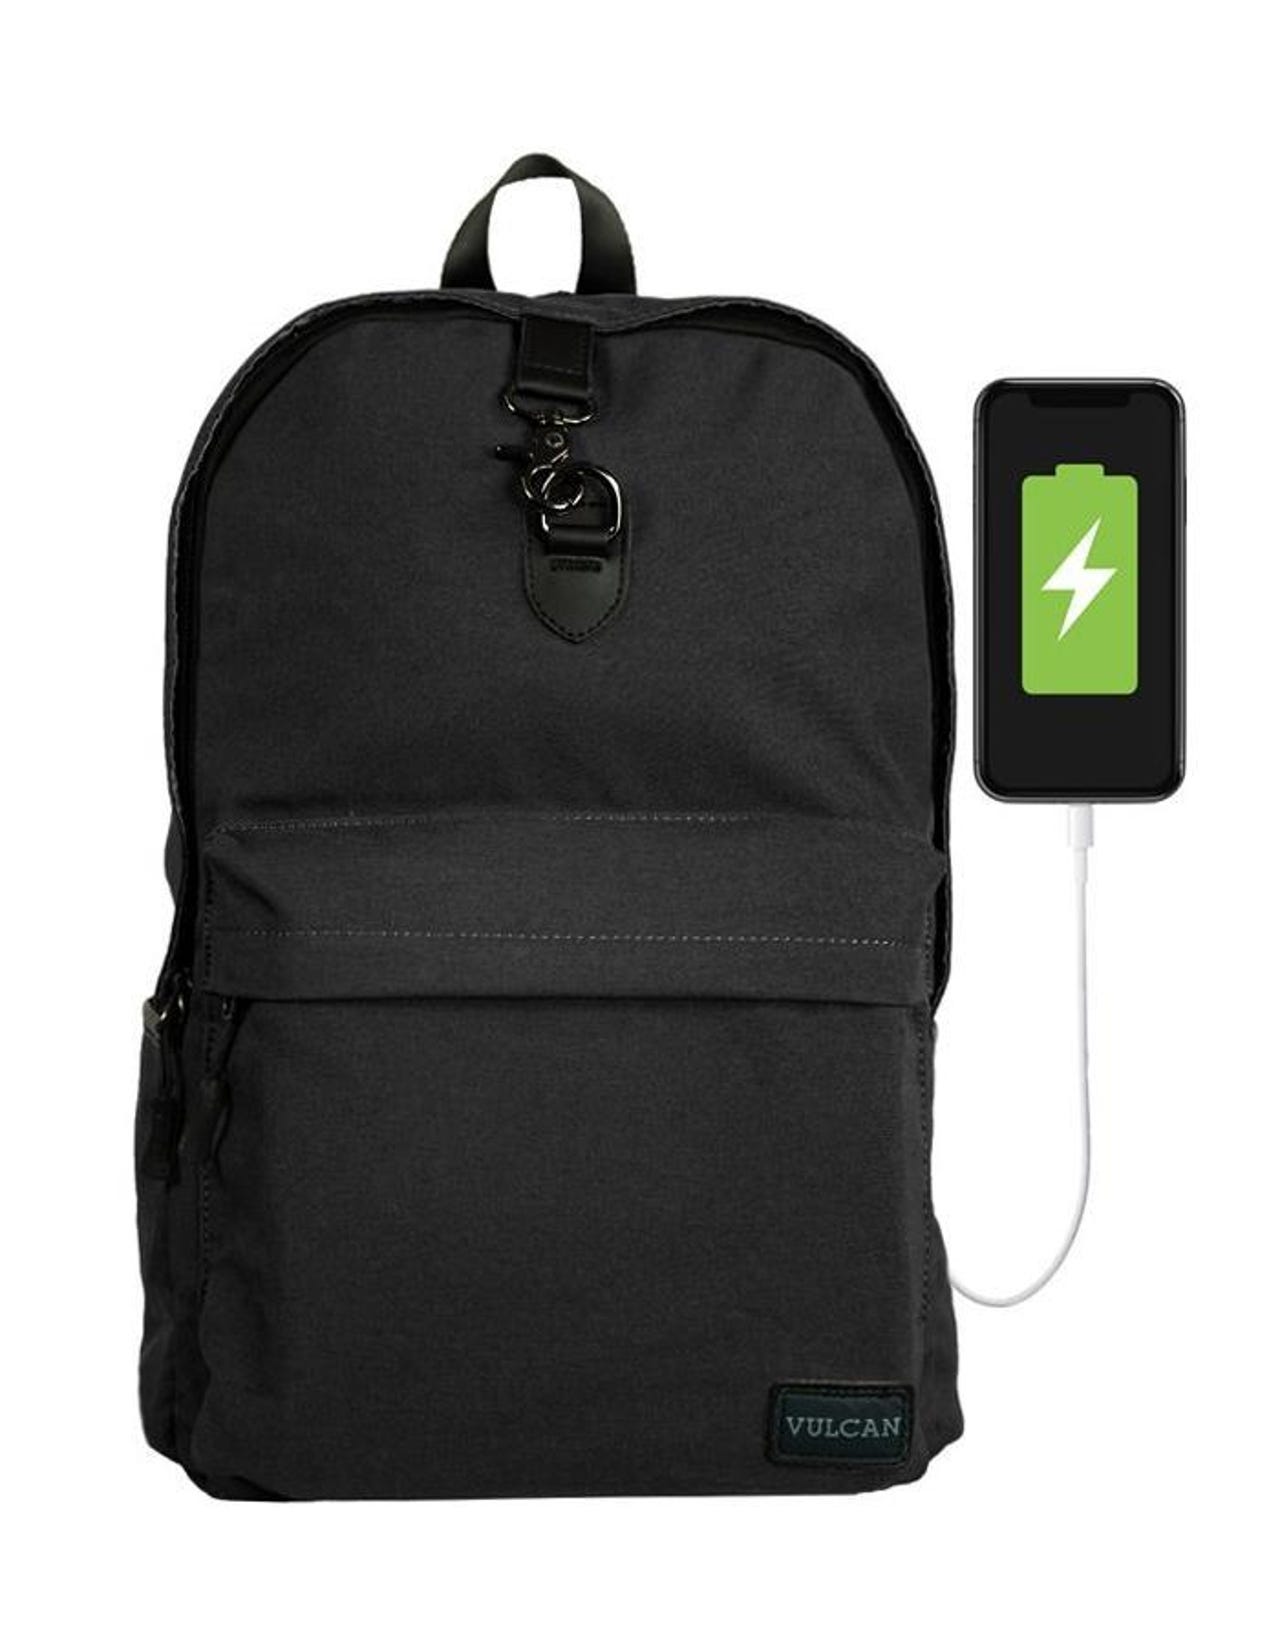 Vulcan Classic Backpack with USB charging port